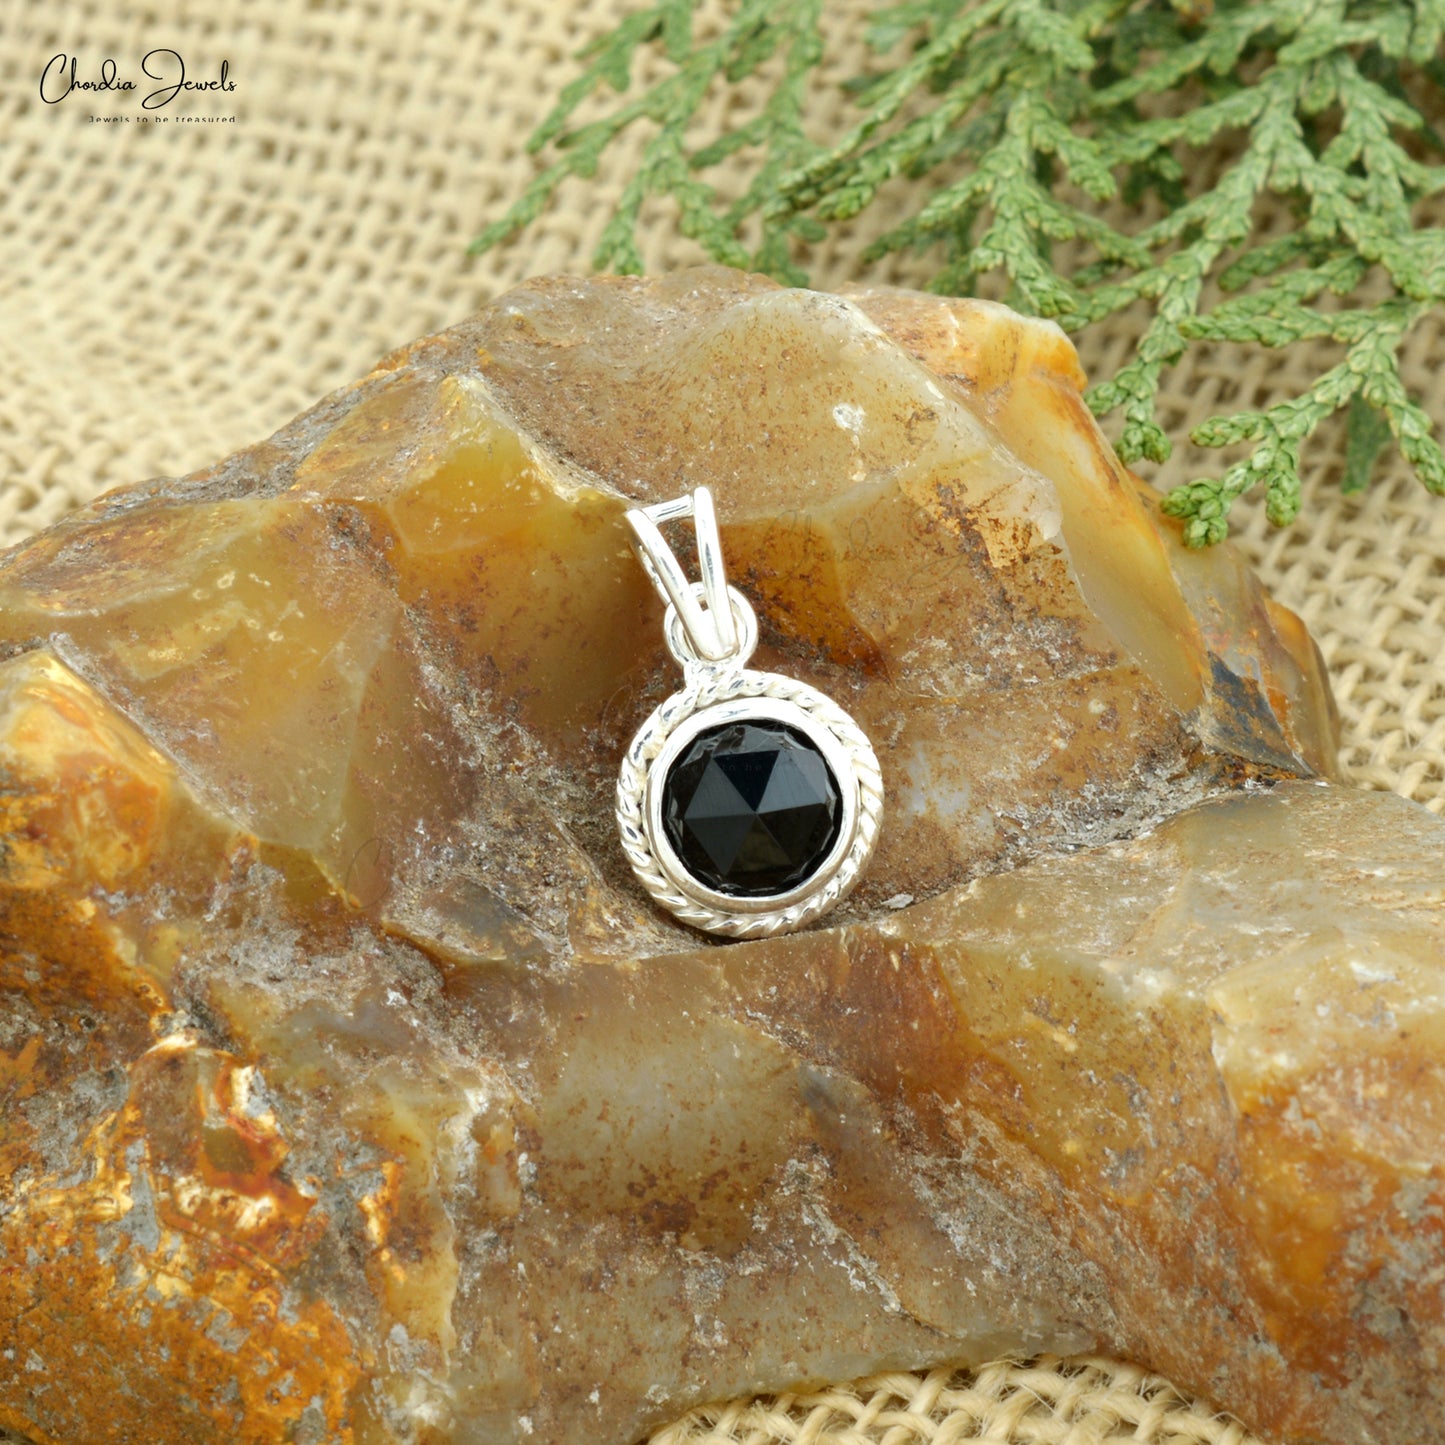 Top Quality Black Onyx Pendant in 925 Sterling Silver Round Cabochon Gemstone Jewelry At Affordable Price